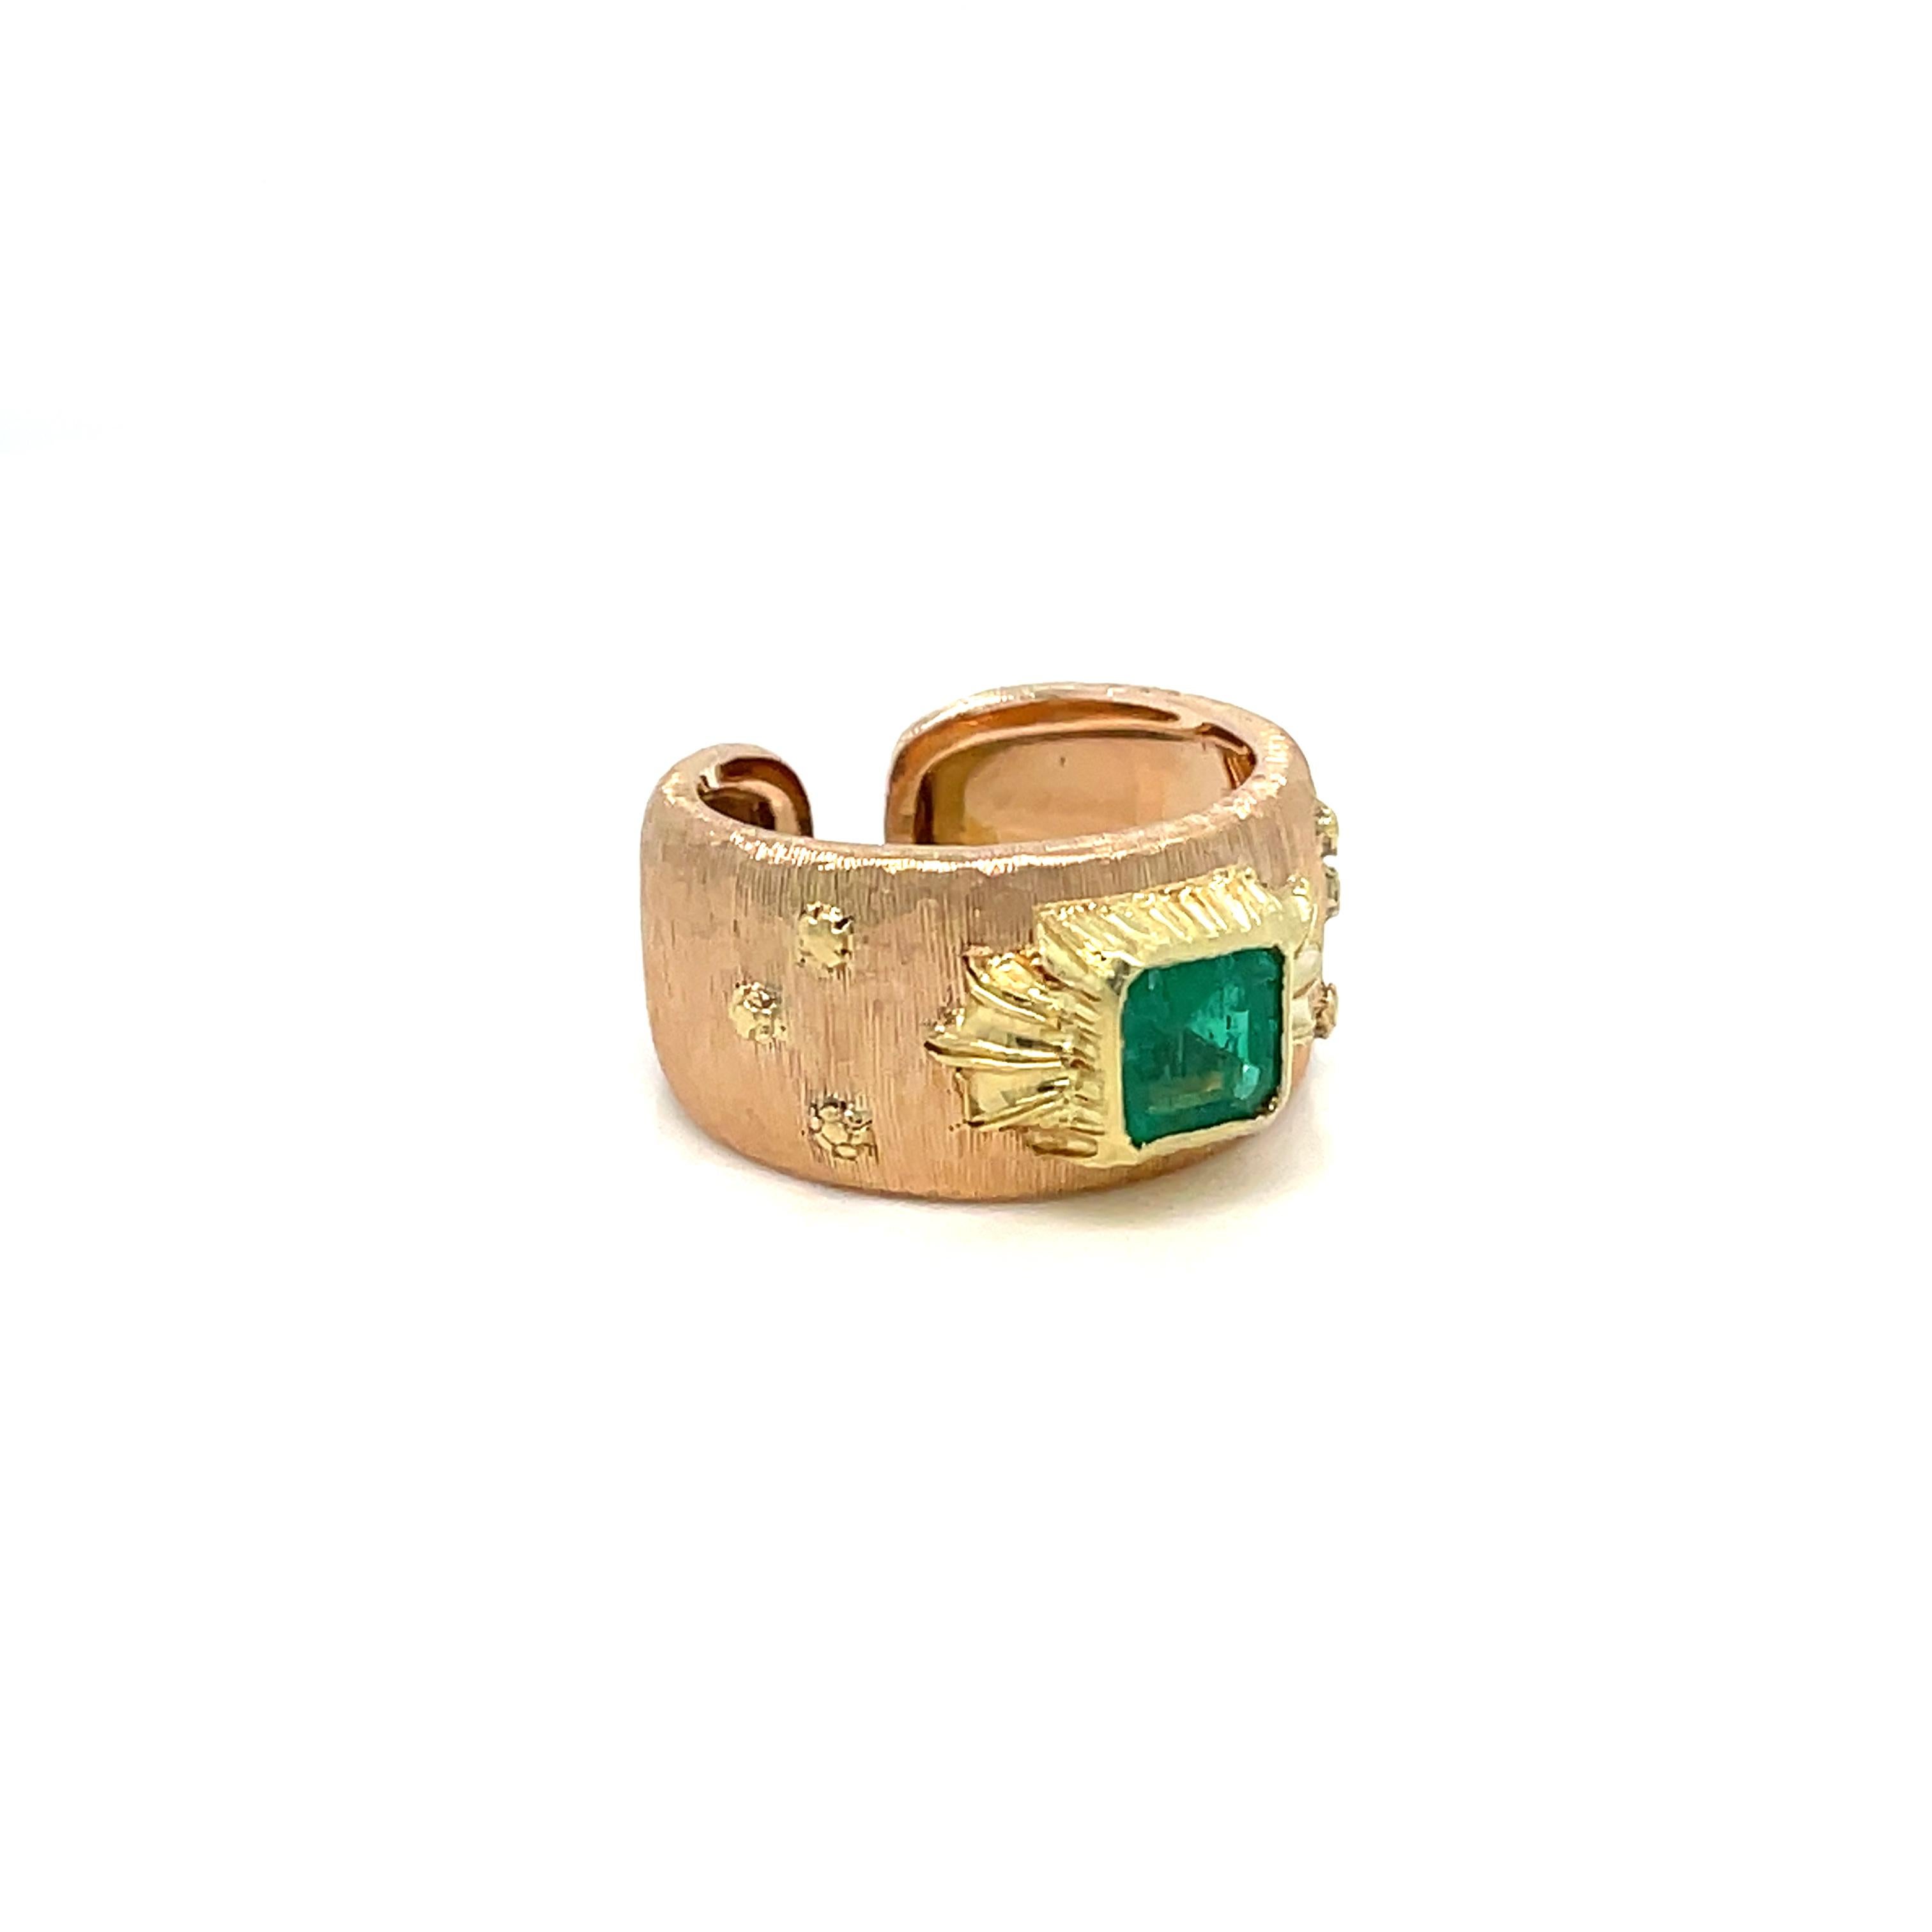 Beautiful Mario Buccellati Engraved ring, handcrafted in 18k yellow and rose Gold, featuring in the center a natural Emerald, 1.30
Circa 1960

The magical iridescent effect of the gold surface, given by the very fine 